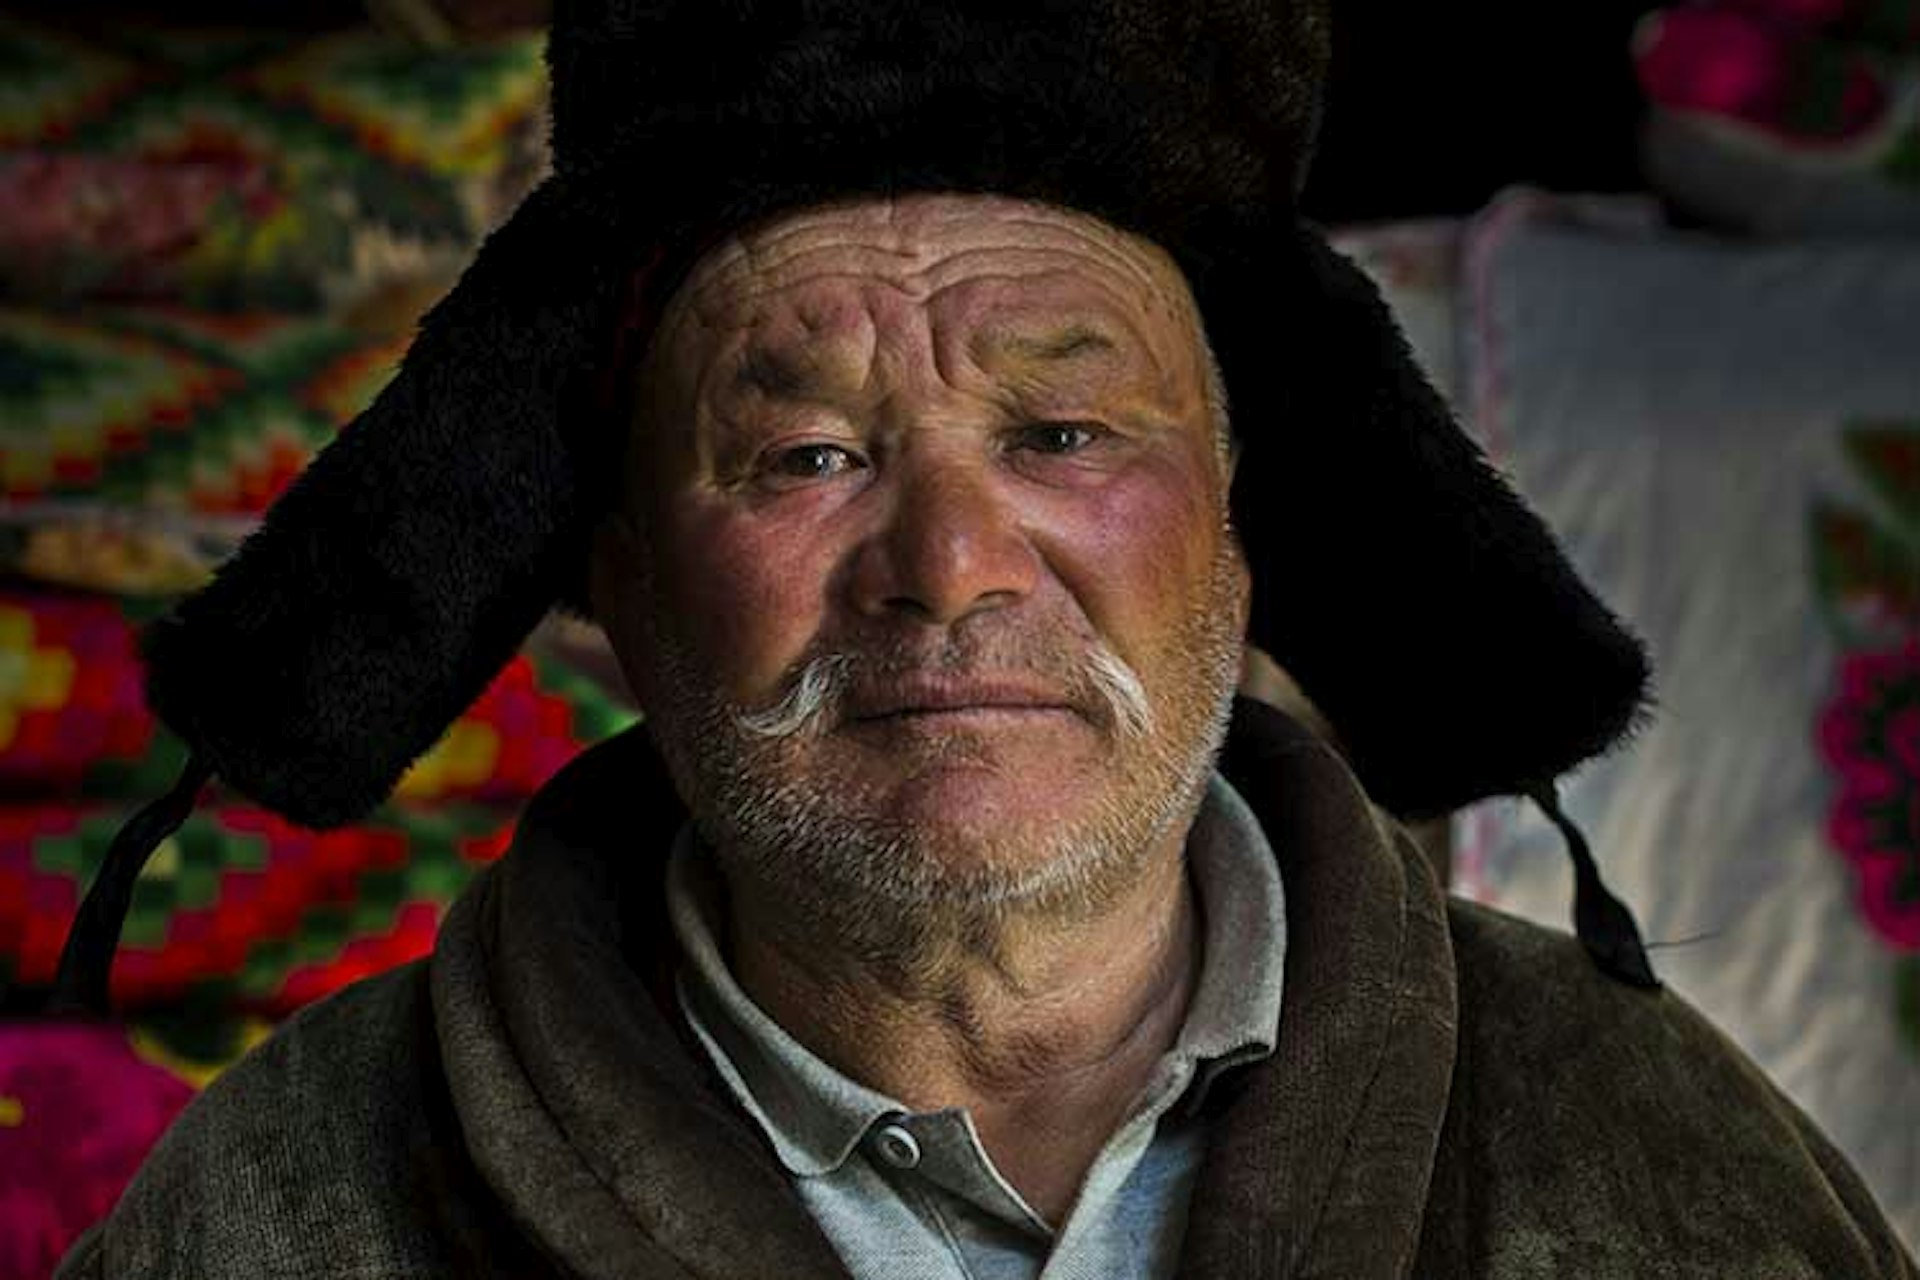 Tavay, the Kazakh patriarch. Image by David Baxendale / Lonely Planet